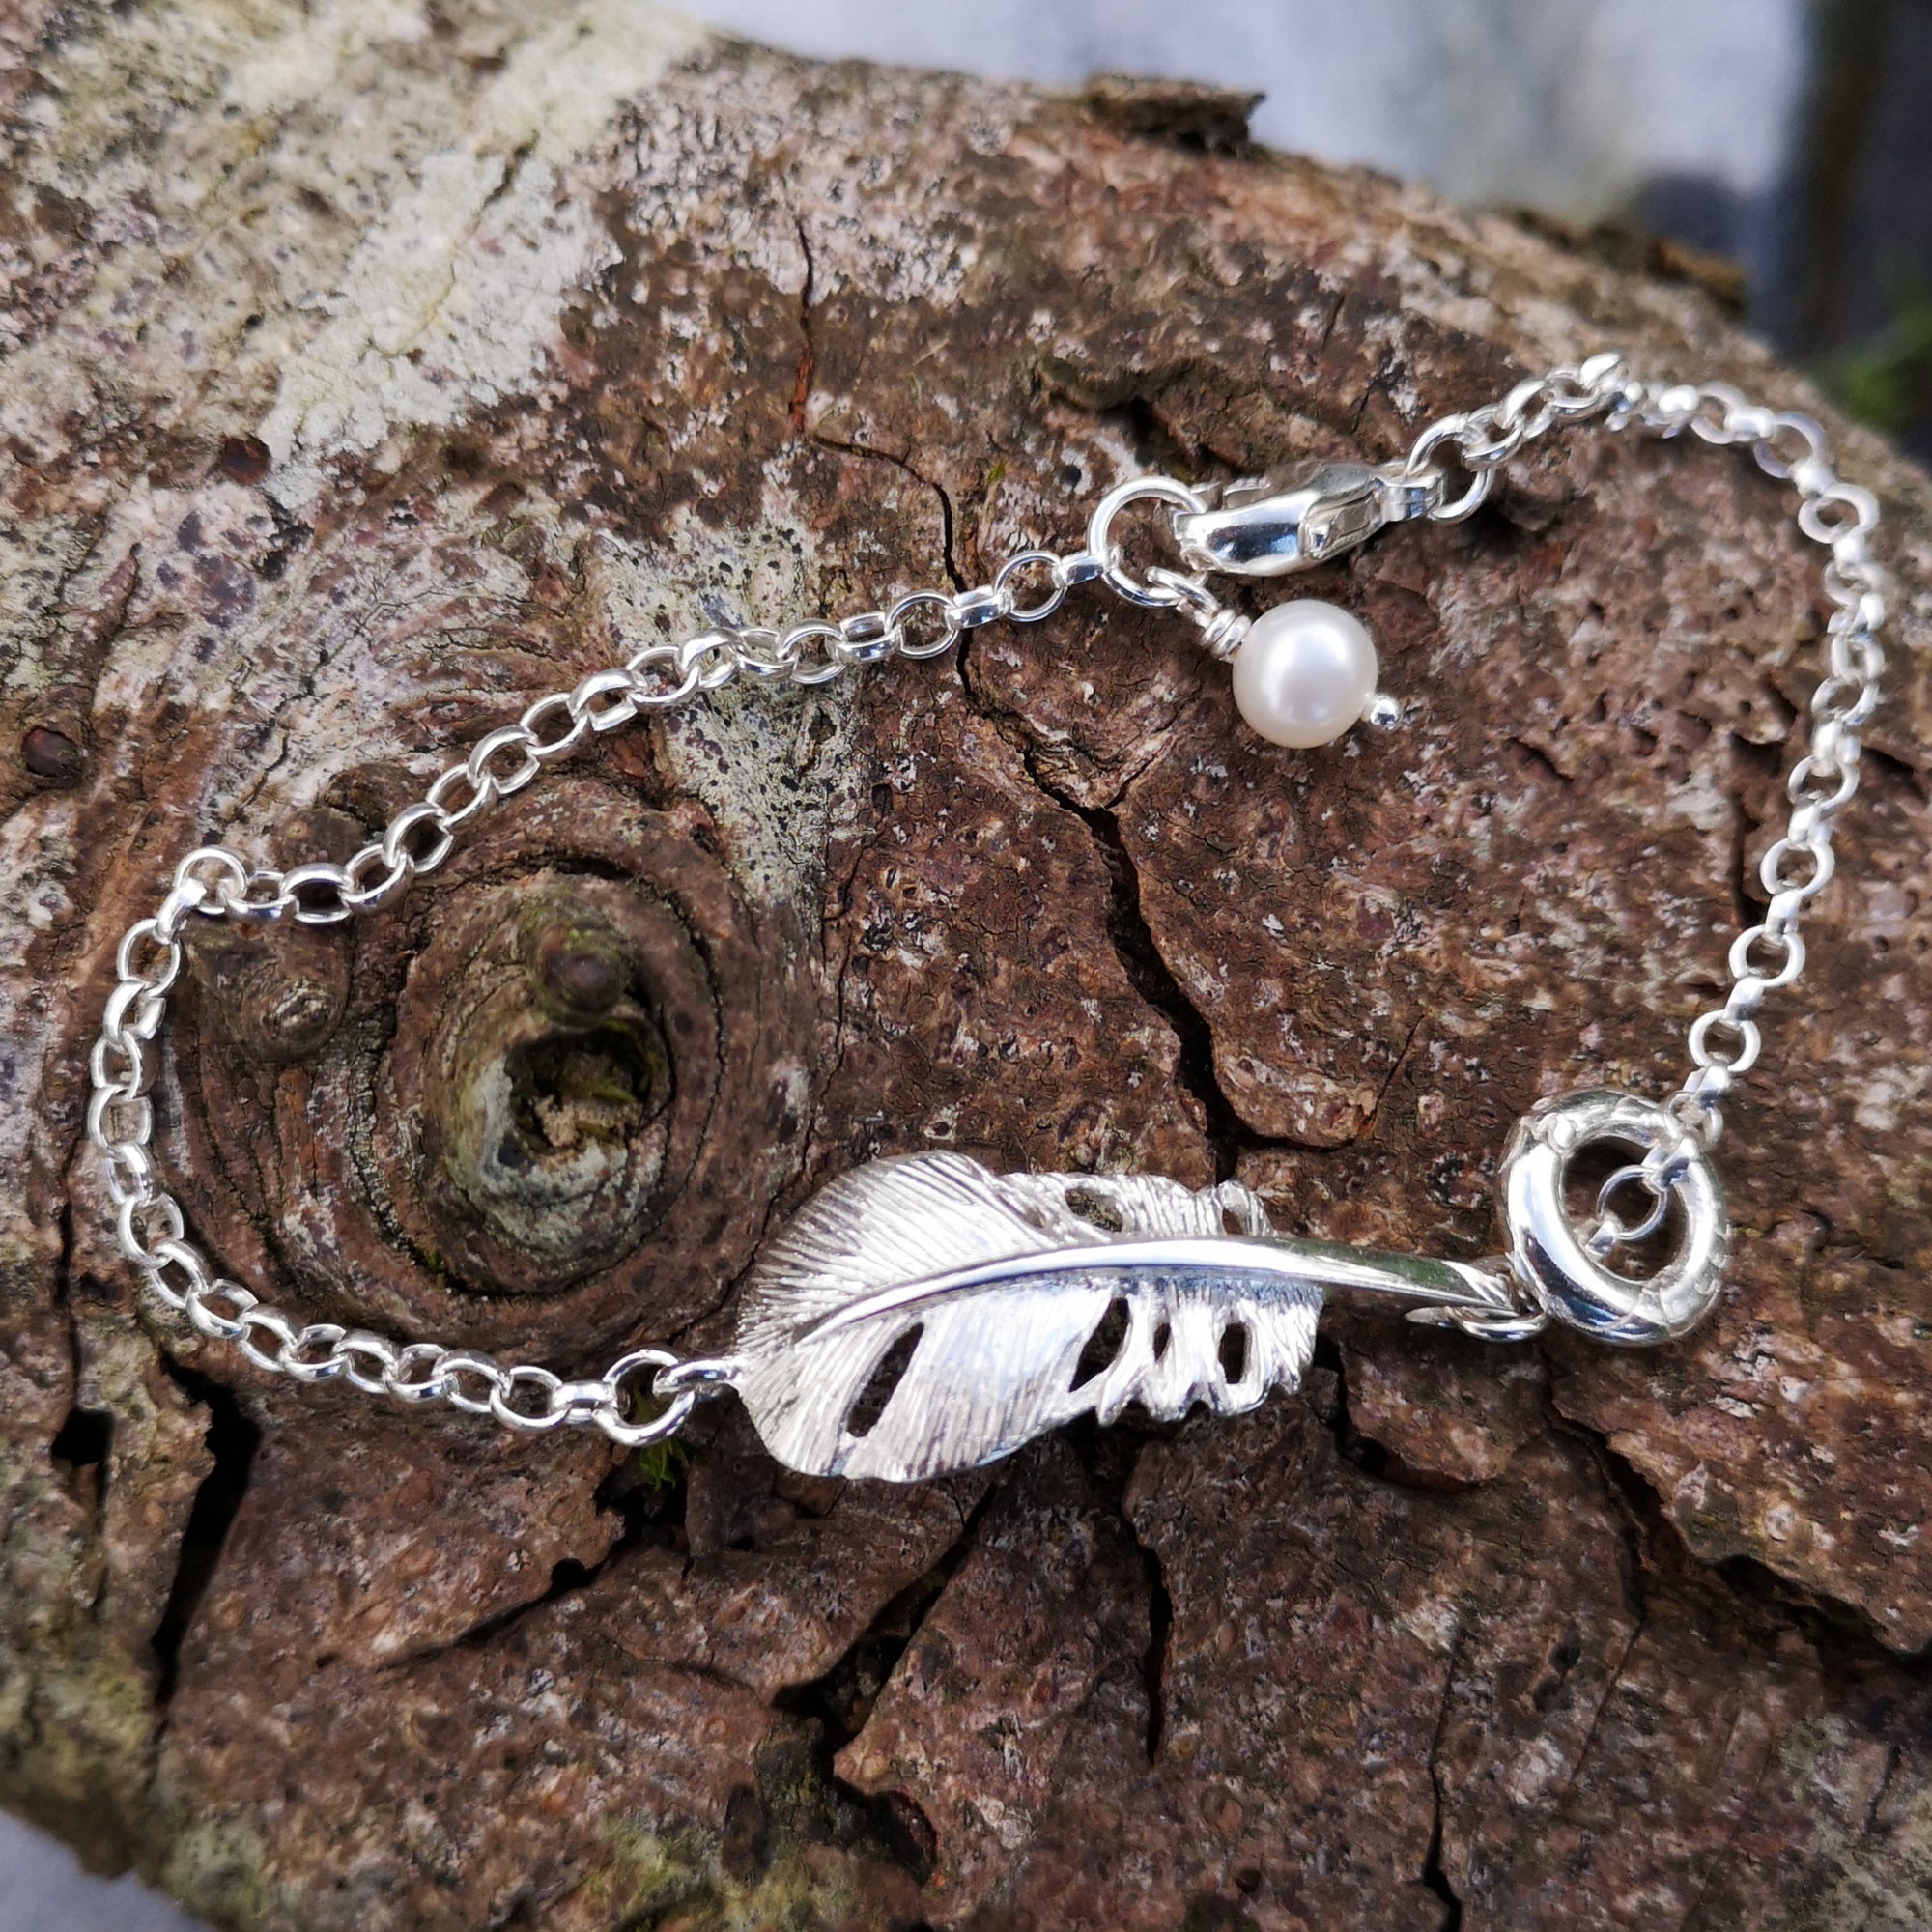 The "Cherish" Baby Angel Feather Bracelet from Elena Brennan's 'My Angel' collection, is made from Irish Sterling Silver. Here it is photographed against tree bark